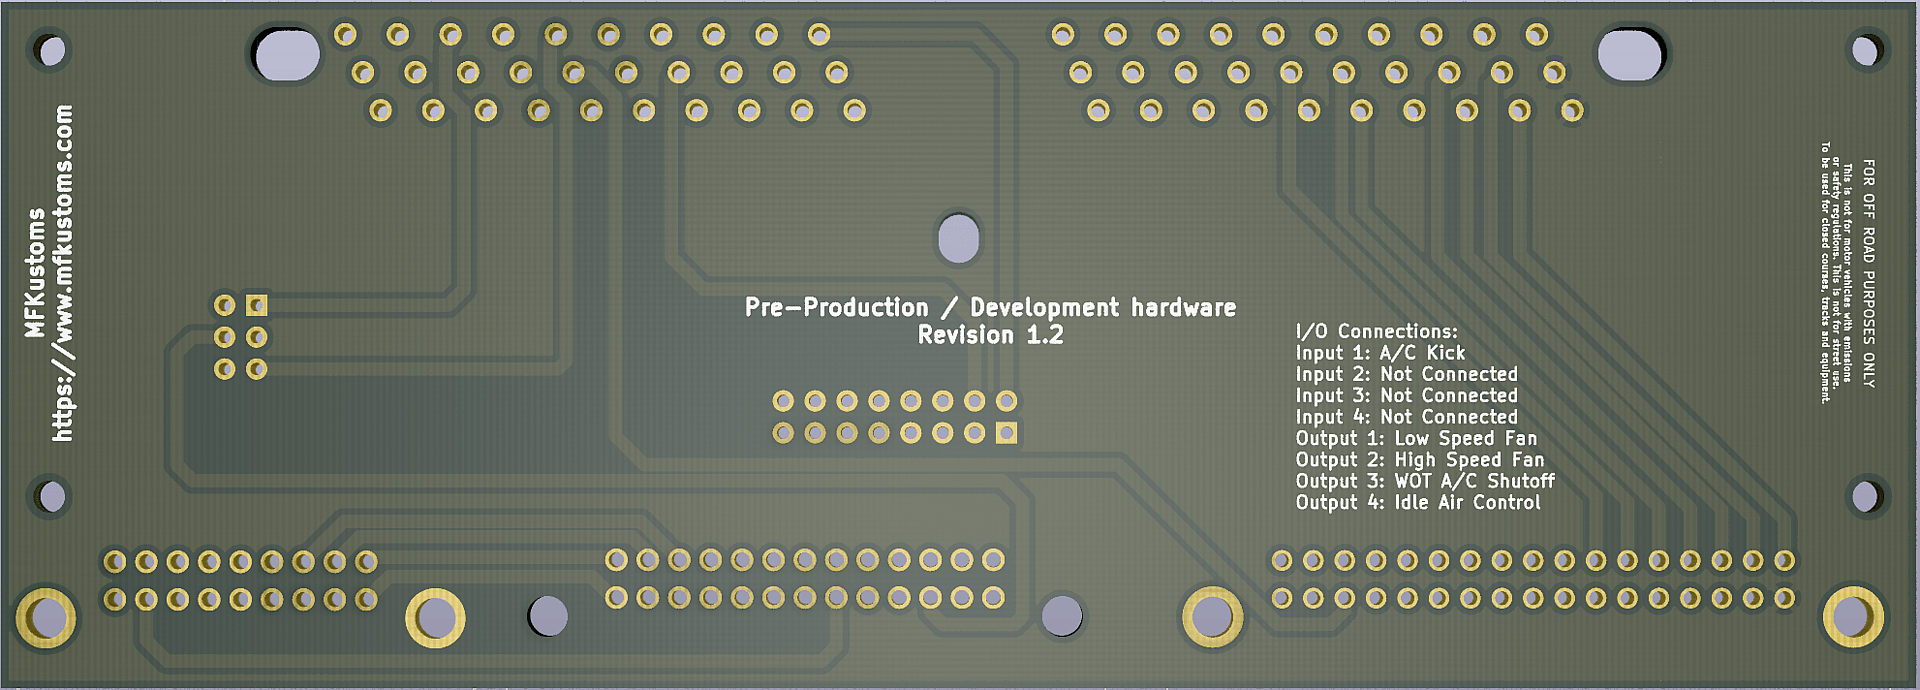 94_95_PCB_Adapter_Back.png